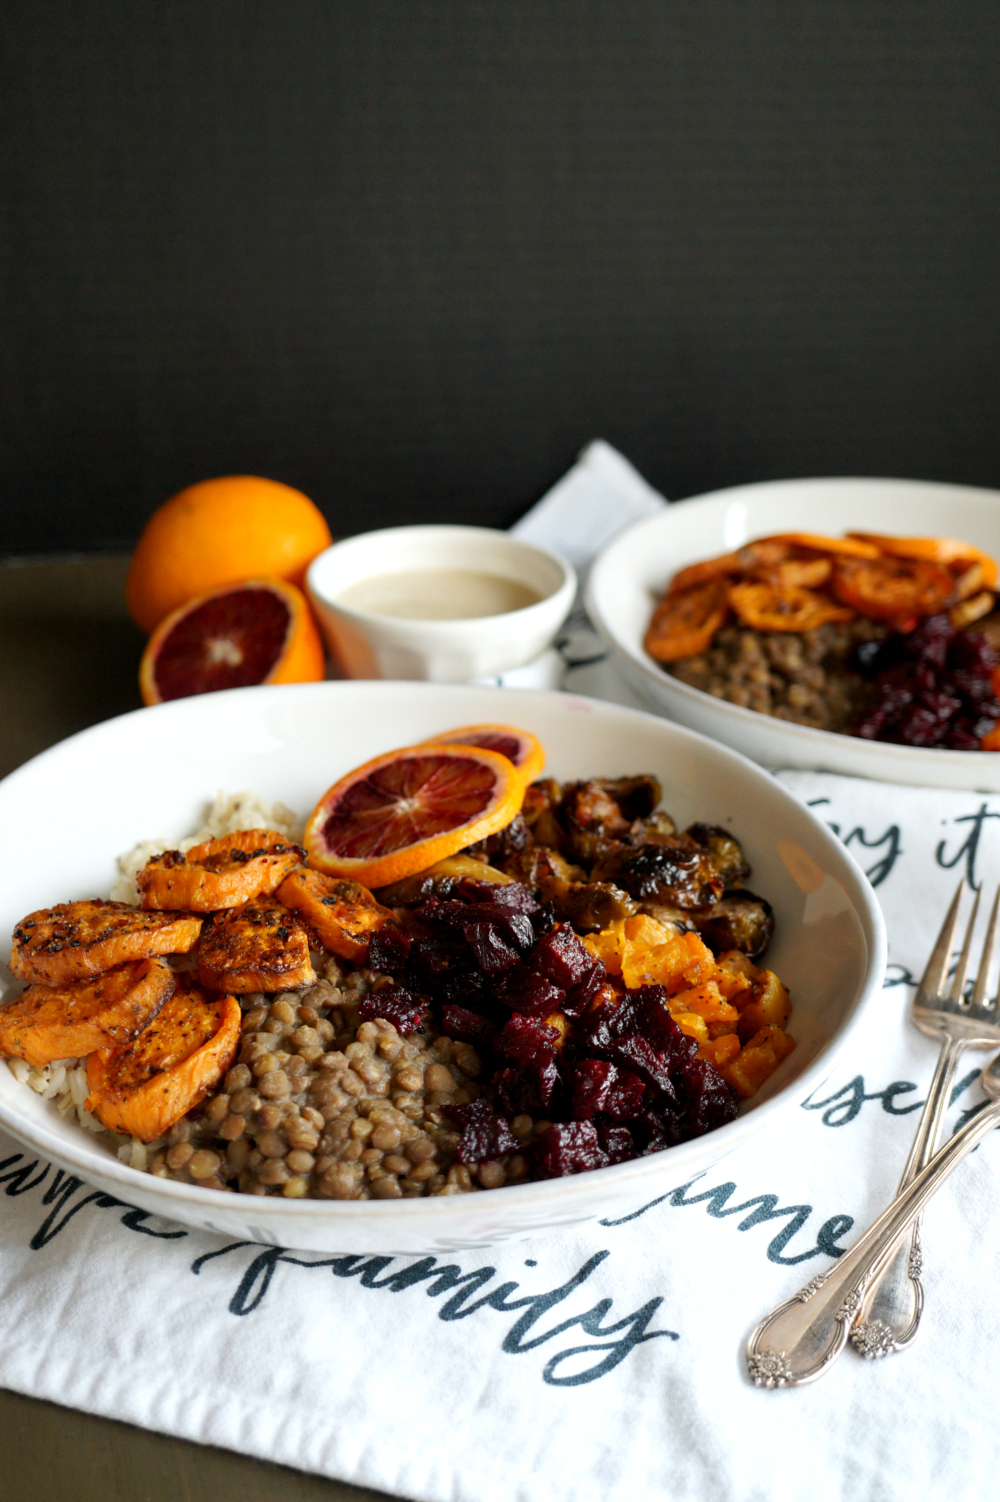 autumn harvest bowls with blood orange tahini drizzle | The Baking Fairy #FreakyFruitsFriday